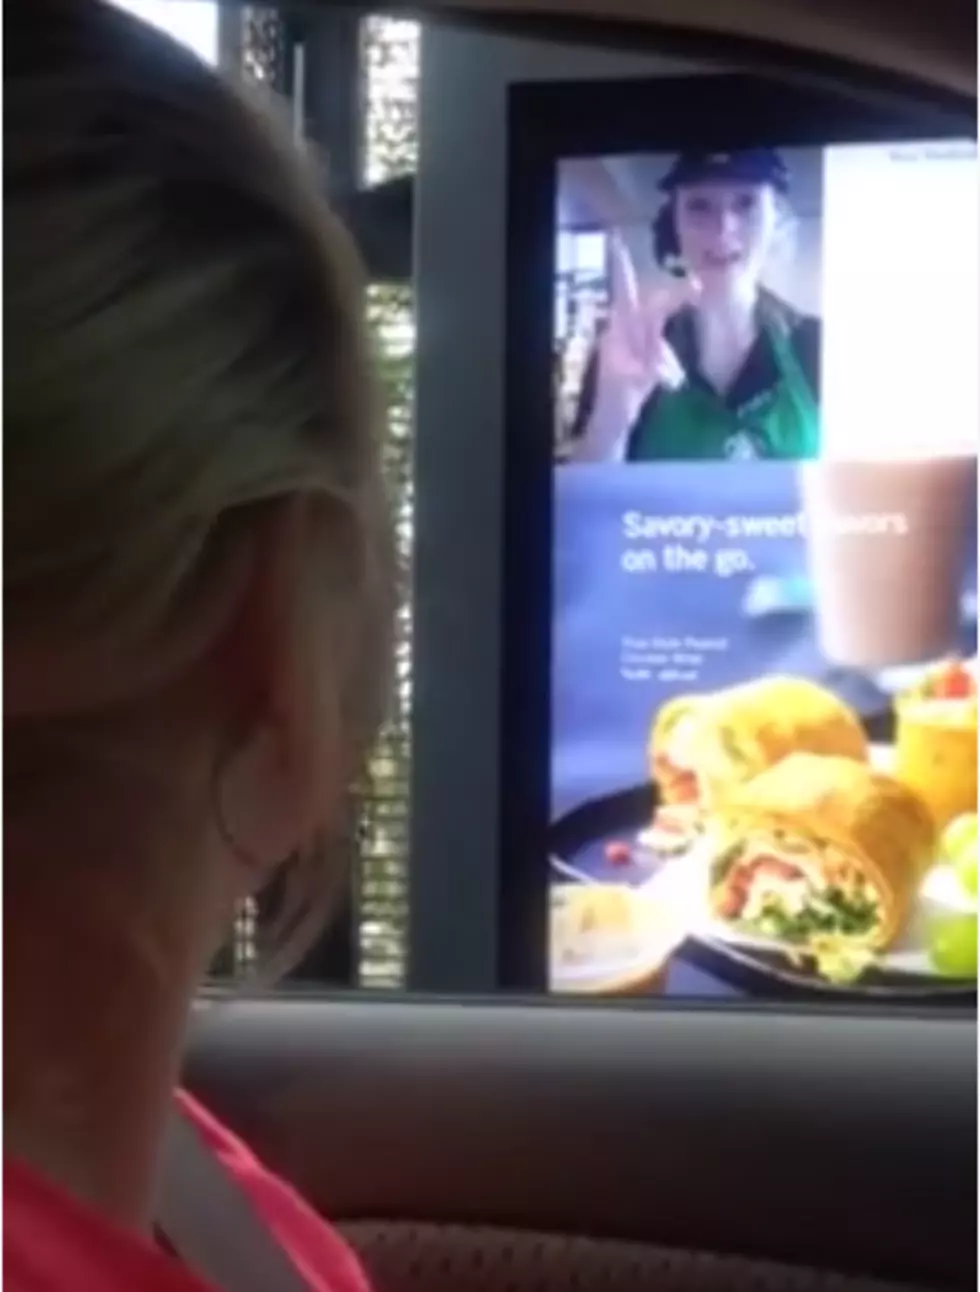 Starbucks Introduces Drive-Thru Sign Language For Hearing Impaired [VIDEO]